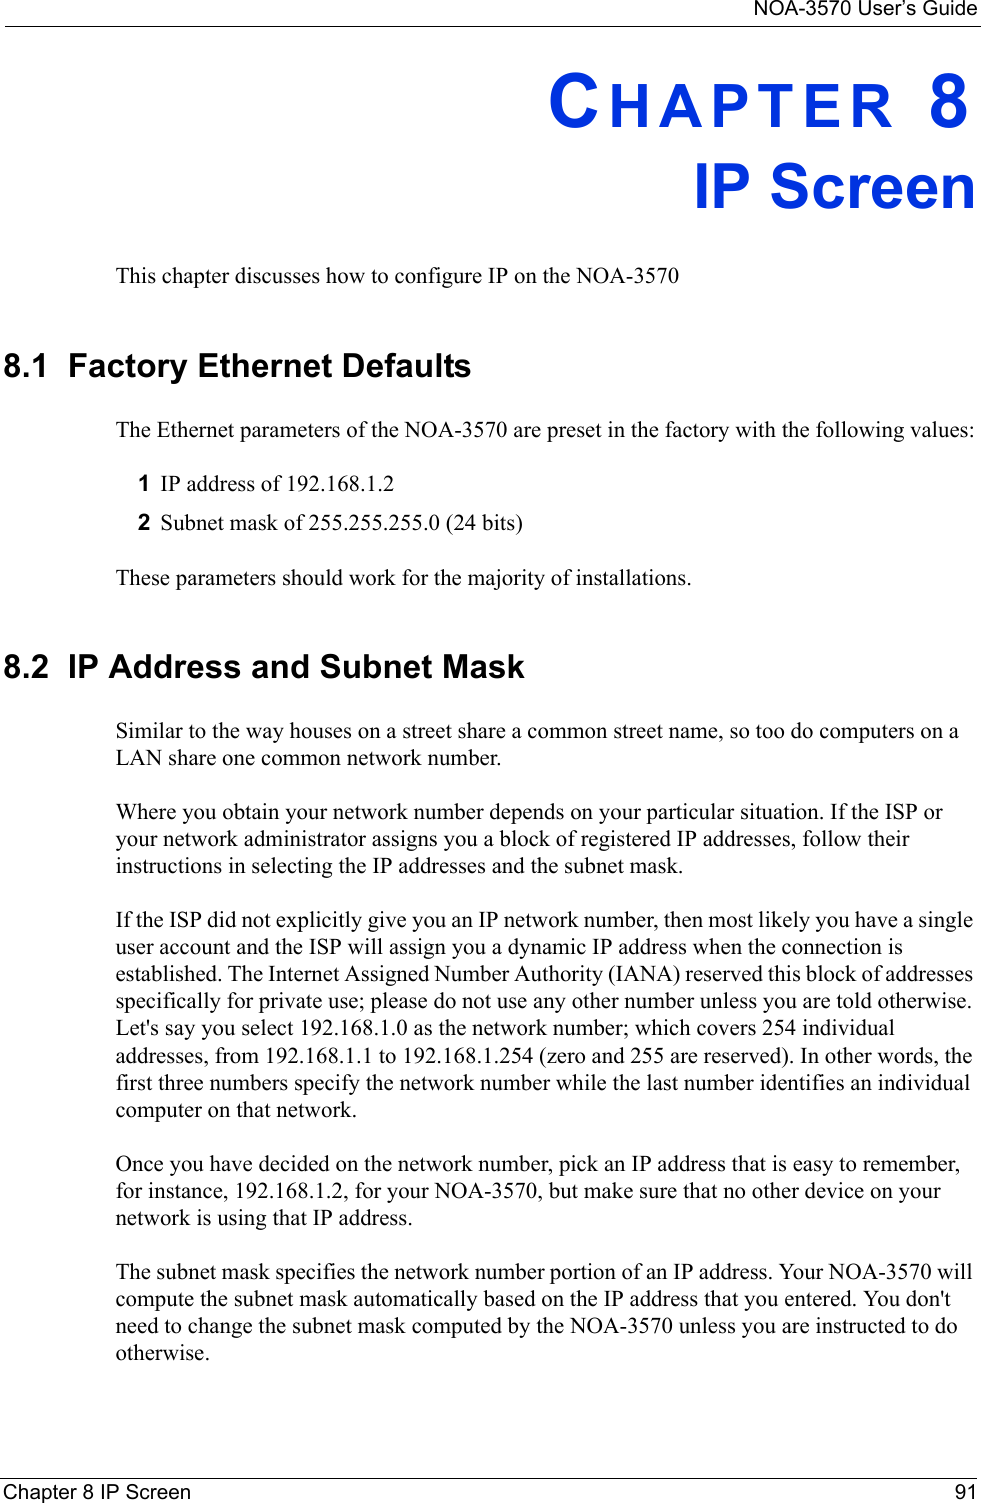 NOA-3570 User’s GuideChapter 8 IP Screen 91CHAPTER 8IP ScreenThis chapter discusses how to configure IP on the NOA-35708.1  Factory Ethernet DefaultsThe Ethernet parameters of the NOA-3570 are preset in the factory with the following values:1IP address of 192.168.1.22Subnet mask of 255.255.255.0 (24 bits)These parameters should work for the majority of installations.8.2  IP Address and Subnet MaskSimilar to the way houses on a street share a common street name, so too do computers on a LAN share one common network number.Where you obtain your network number depends on your particular situation. If the ISP or your network administrator assigns you a block of registered IP addresses, follow their instructions in selecting the IP addresses and the subnet mask.If the ISP did not explicitly give you an IP network number, then most likely you have a single user account and the ISP will assign you a dynamic IP address when the connection is established. The Internet Assigned Number Authority (IANA) reserved this block of addresses specifically for private use; please do not use any other number unless you are told otherwise. Let&apos;s say you select 192.168.1.0 as the network number; which covers 254 individual addresses, from 192.168.1.1 to 192.168.1.254 (zero and 255 are reserved). In other words, the first three numbers specify the network number while the last number identifies an individual computer on that network.Once you have decided on the network number, pick an IP address that is easy to remember, for instance, 192.168.1.2, for your NOA-3570, but make sure that no other device on your network is using that IP address.The subnet mask specifies the network number portion of an IP address. Your NOA-3570 will compute the subnet mask automatically based on the IP address that you entered. You don&apos;t need to change the subnet mask computed by the NOA-3570 unless you are instructed to do otherwise.